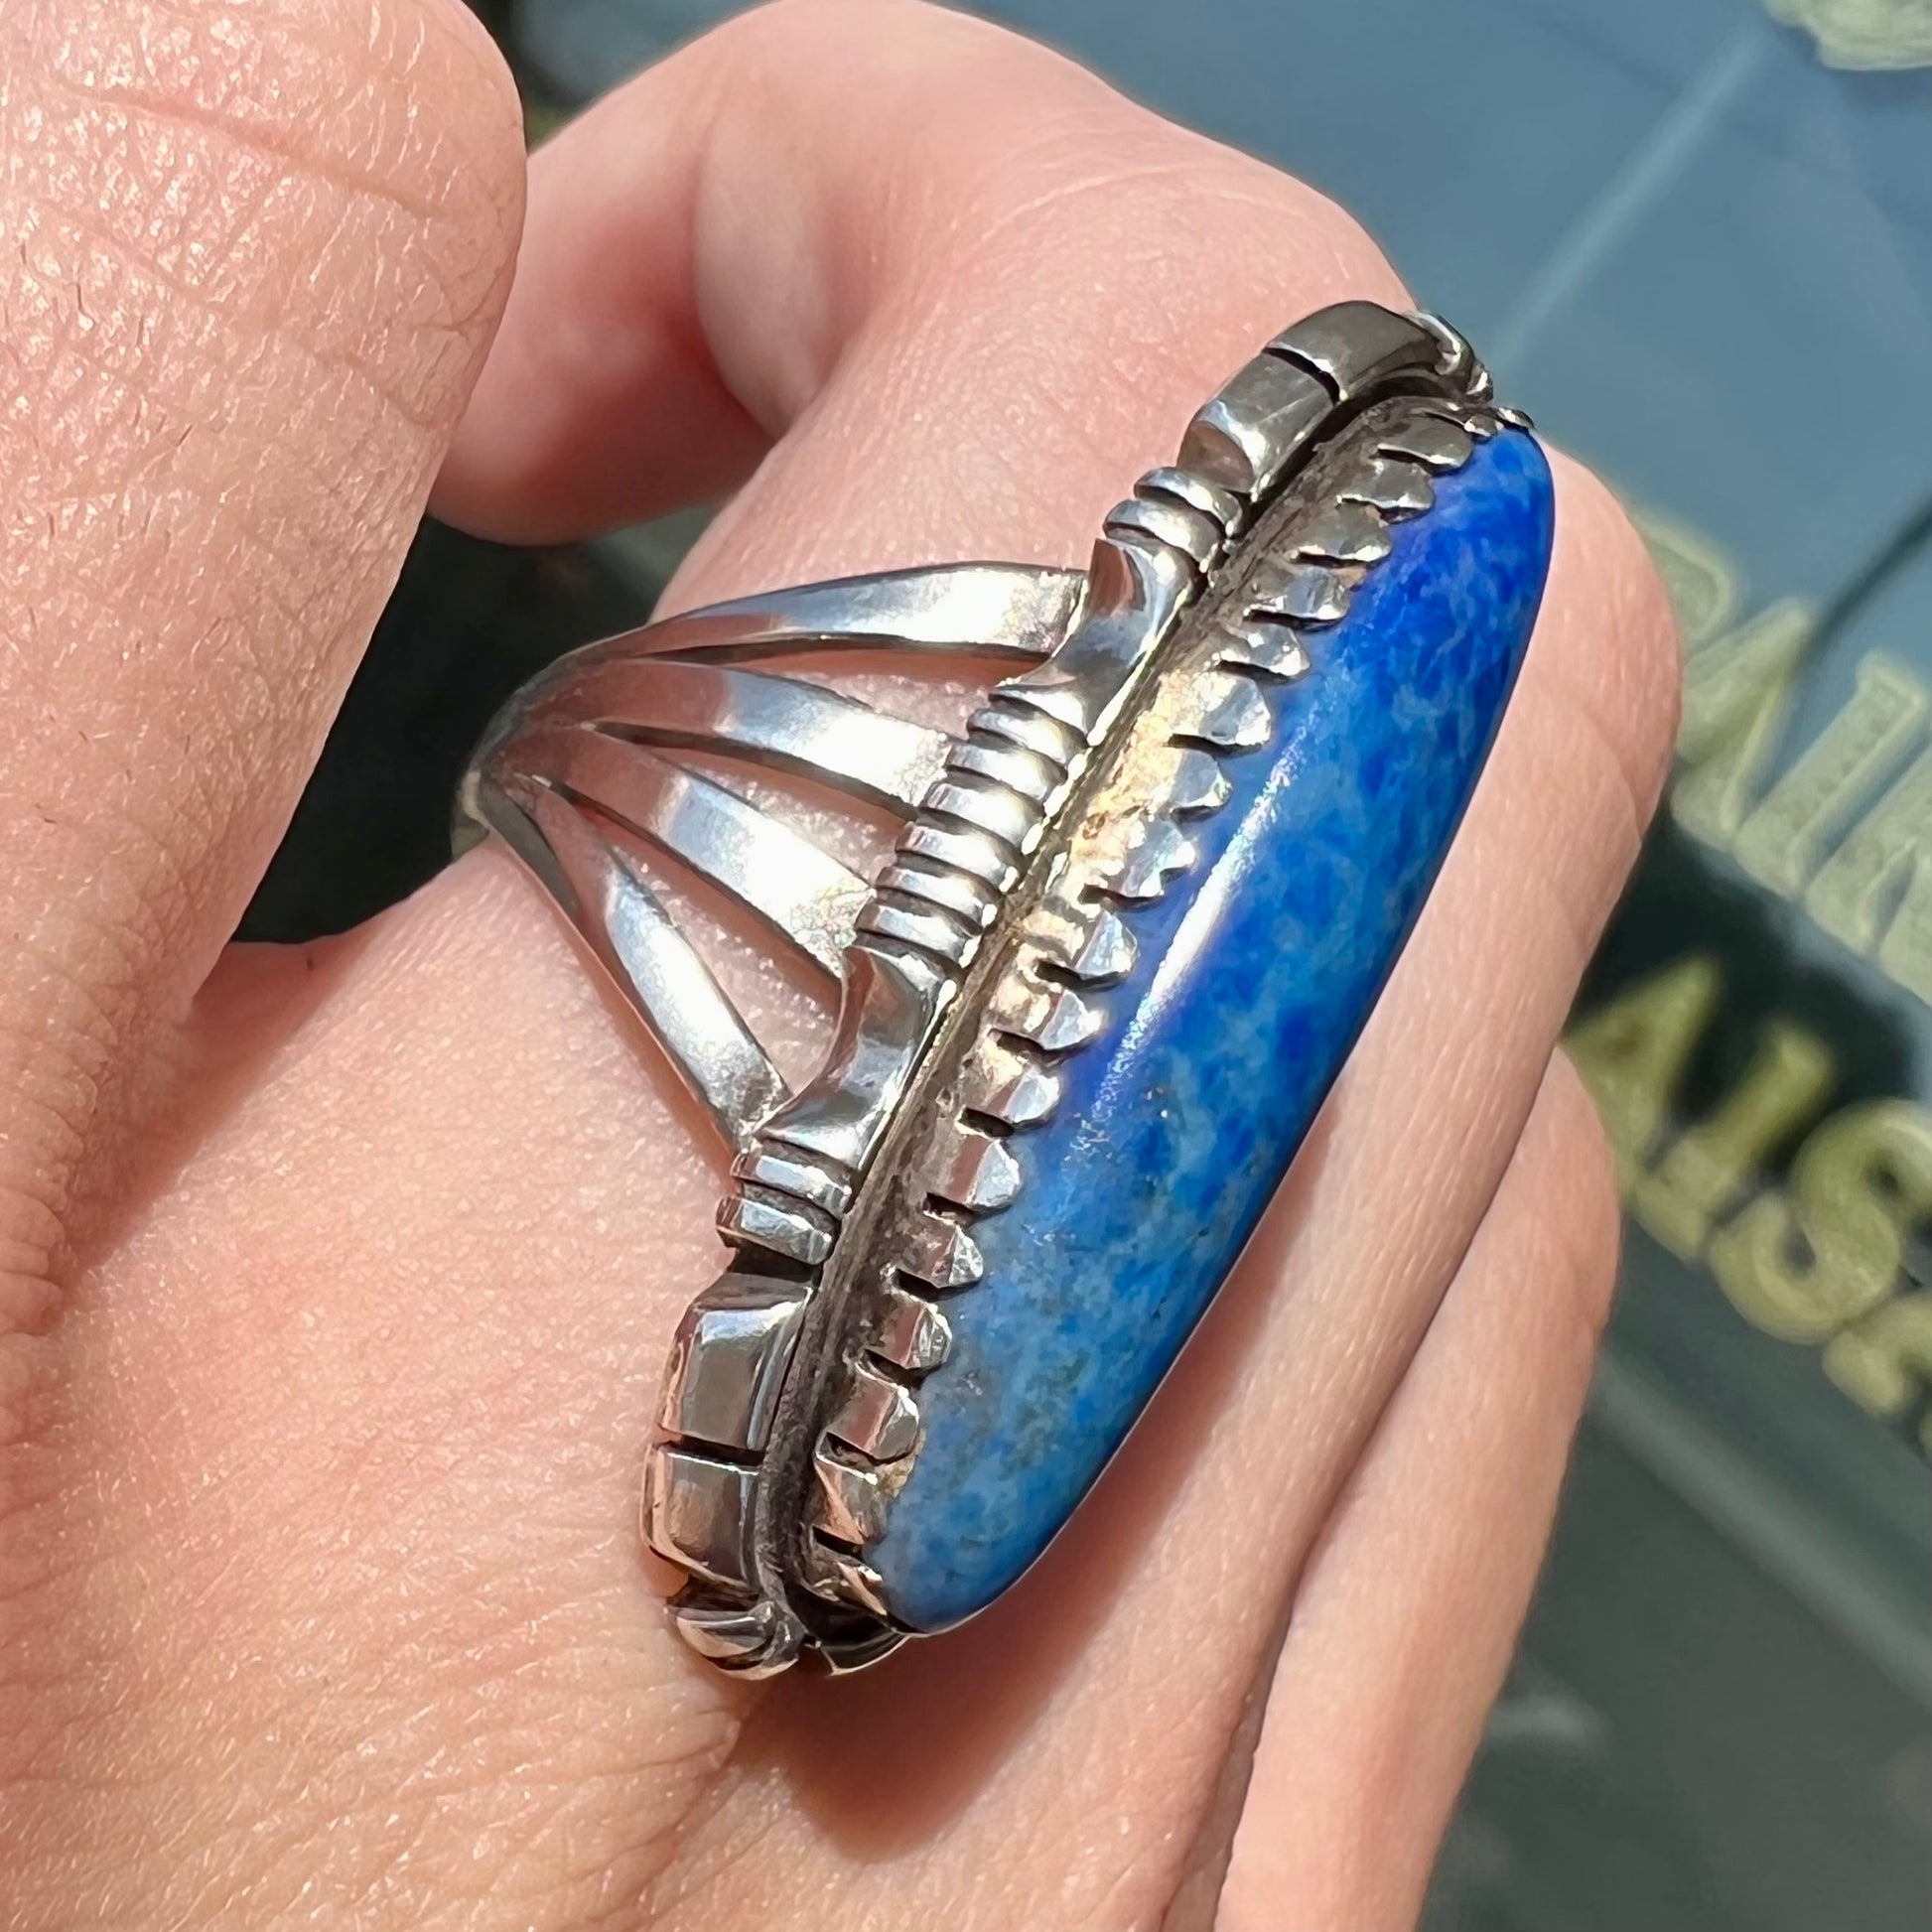 A Navajo style sterling silver lapis lazuli ring engraved with the words "R. Bennett".